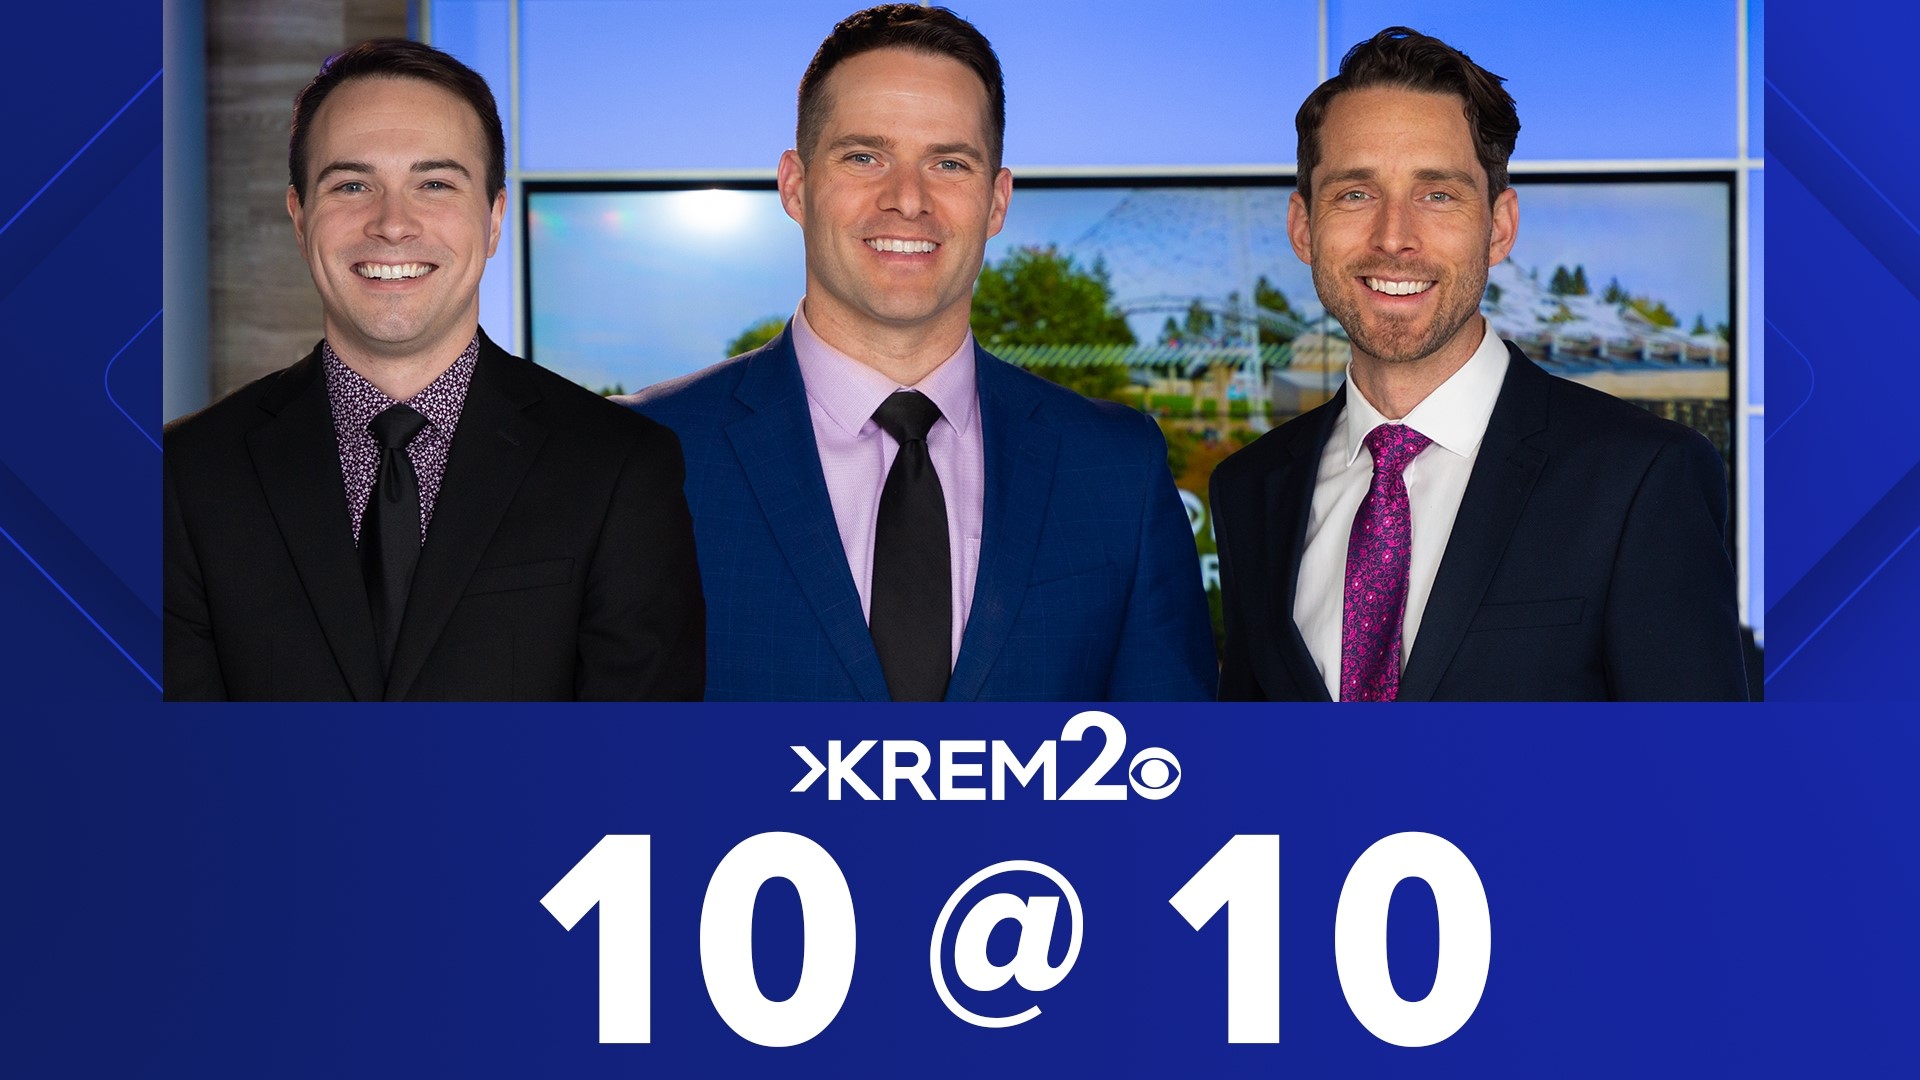 Join KREM 2 News for '10 @ 10,' a quick look at all the day's biggest headlines, plus a look ahead to what's happening tomorrow and the latest weather and sports.